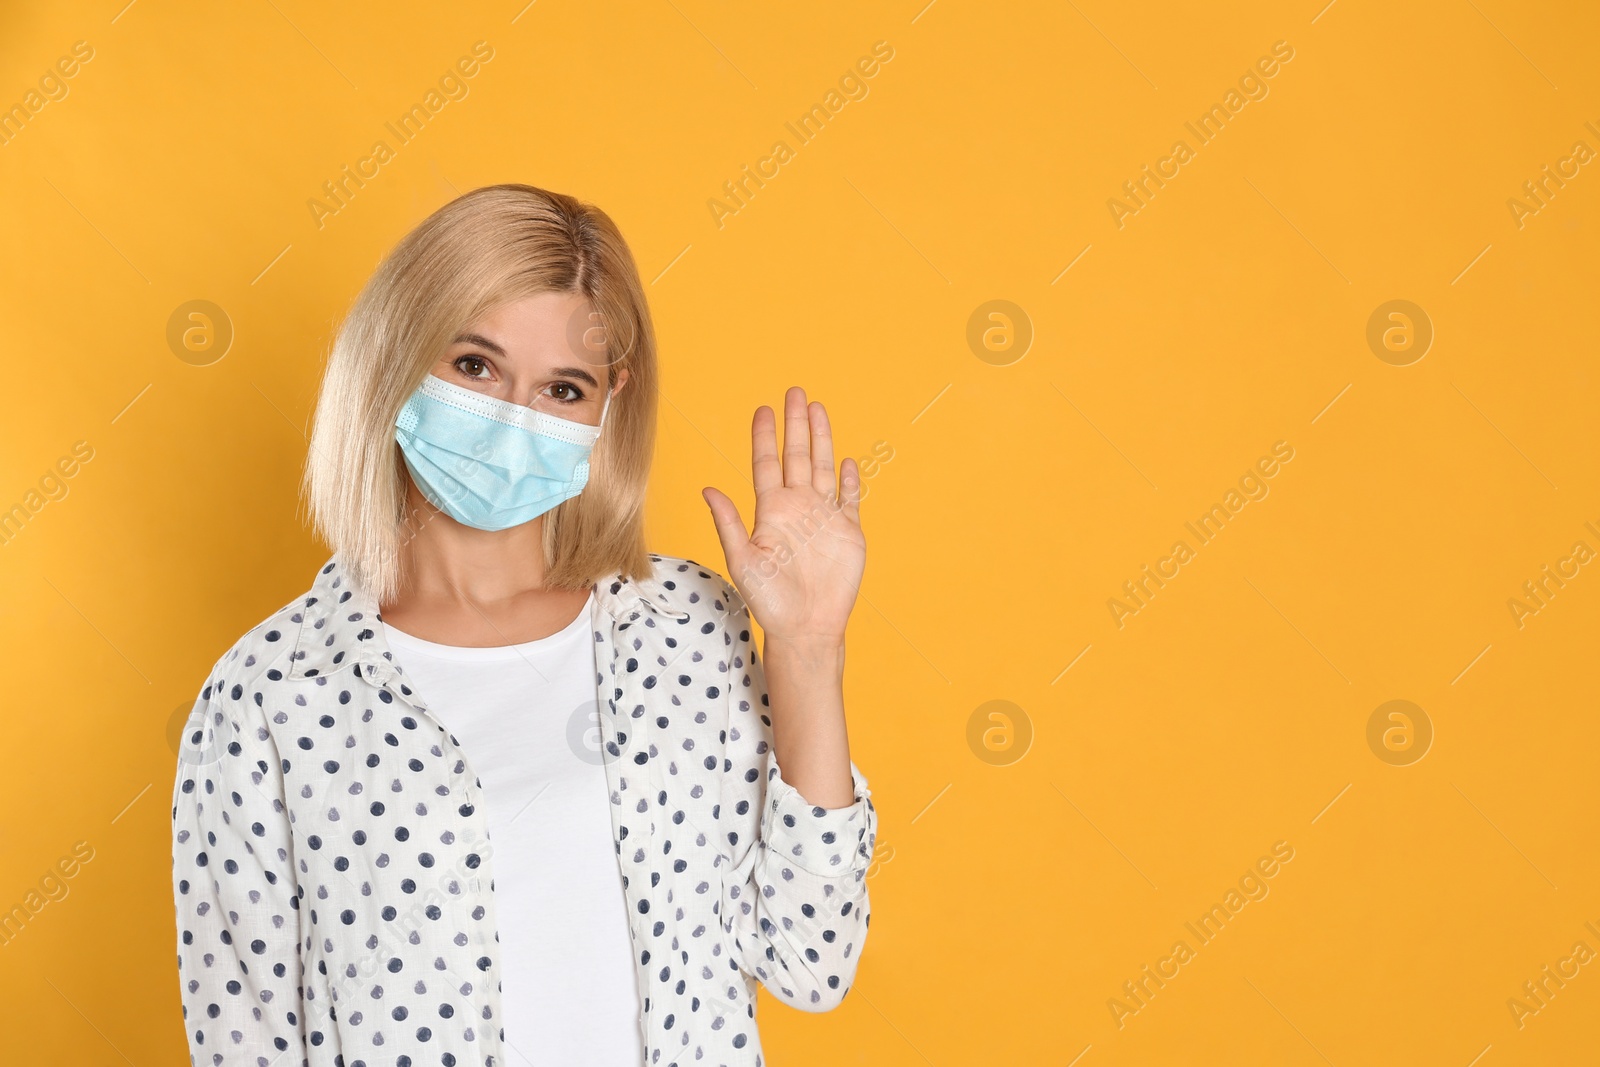 Photo of Woman in protective mask showing hello gesture on yellow background, space for text. Keeping social distance during coronavirus pandemic